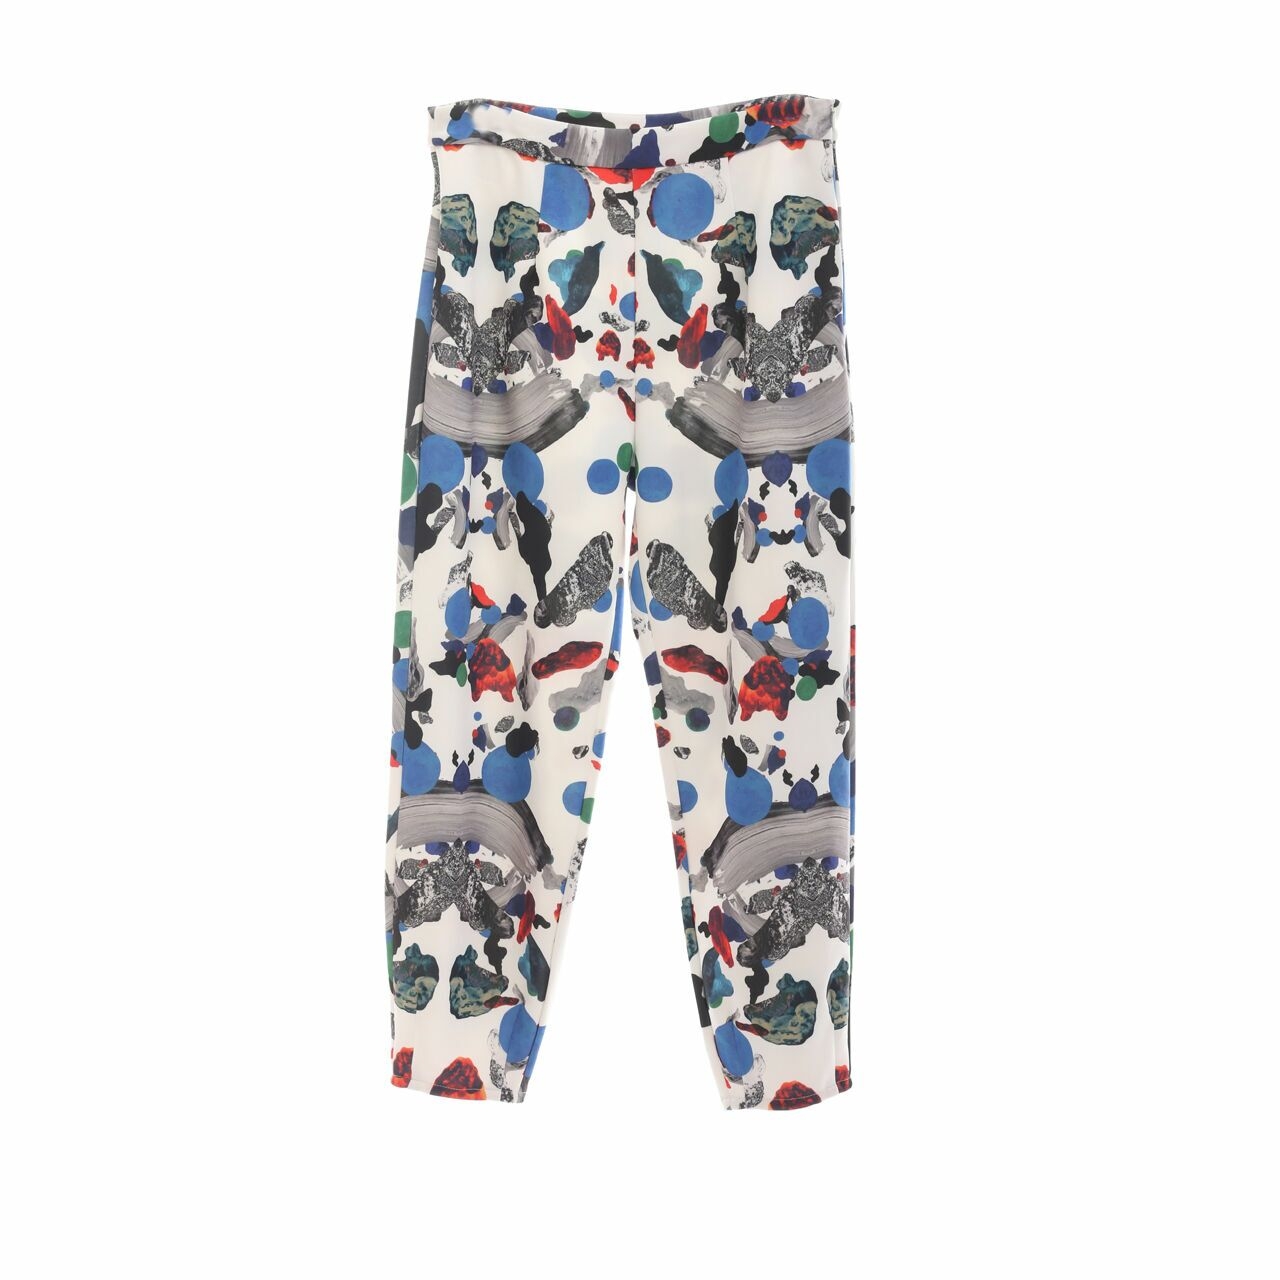 Cotton Ink White Patterned Long Pants